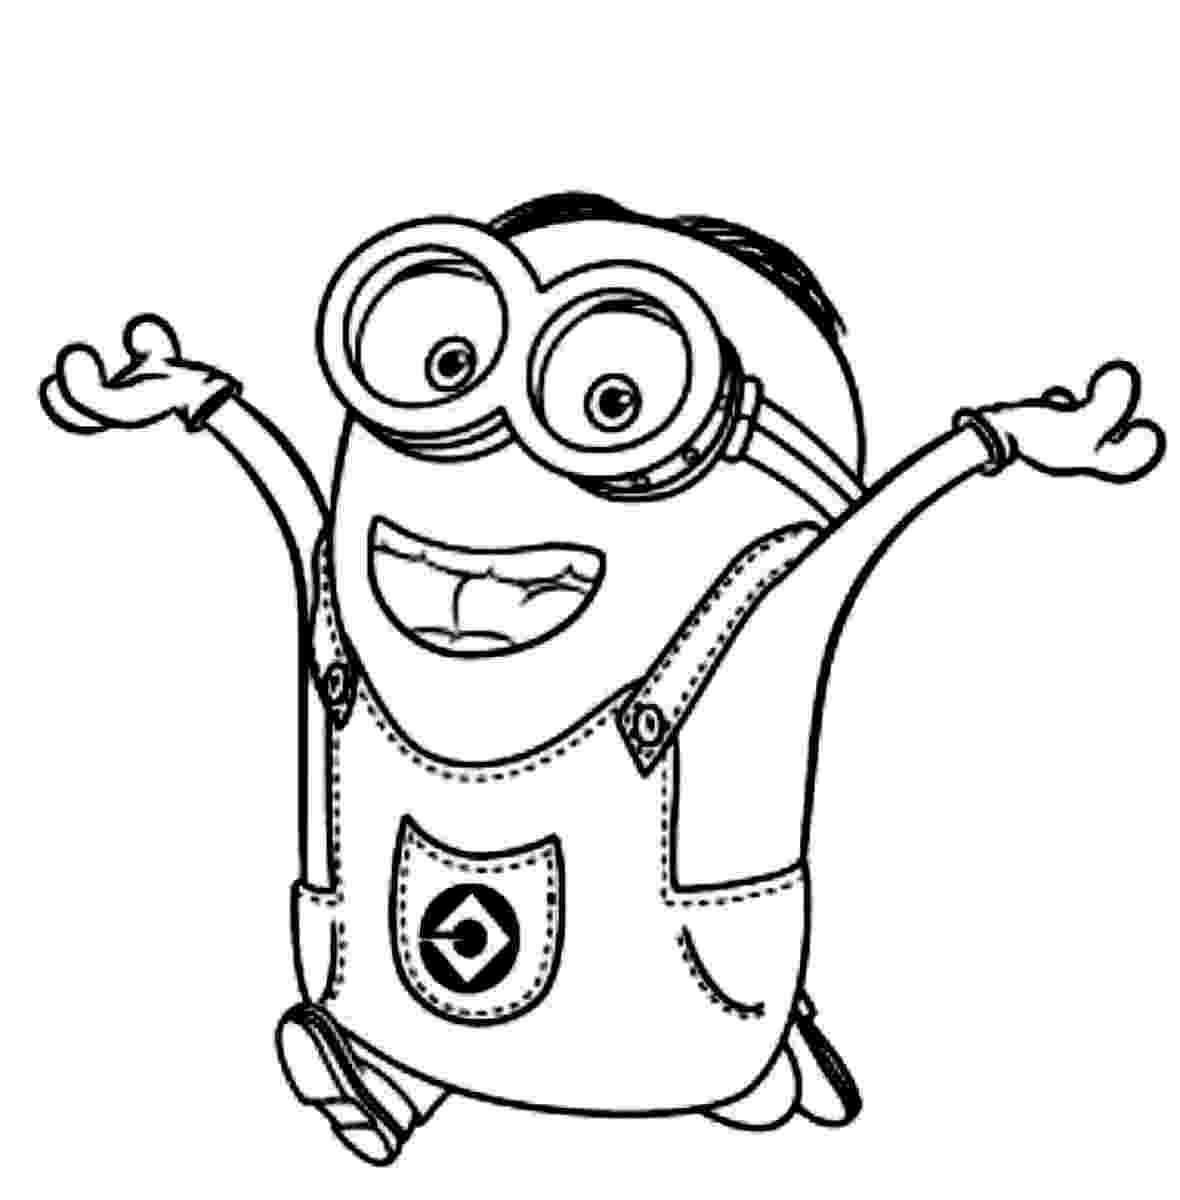 despicable me printables despicable me gru daughters and minions coloring pages despicable me printables 